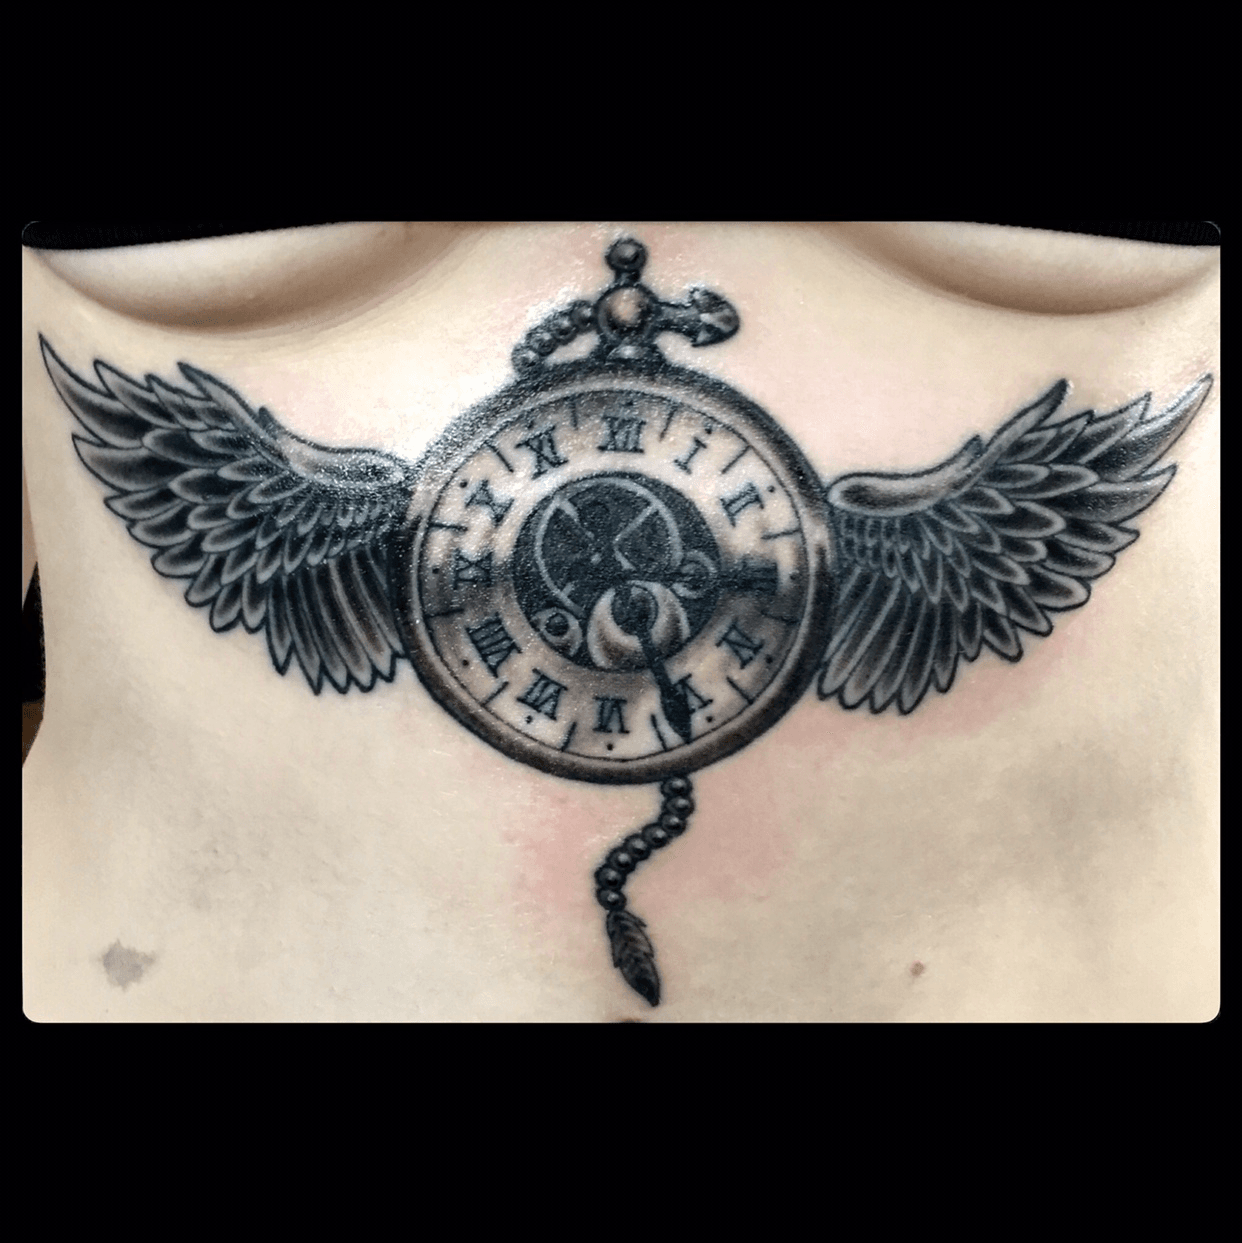 Angel Wings Compass Temporary Tattoo Arm Sleeve For Women Men Adult Clock  Fake Tattoos Full Sleeve Black Water Transfer Tattoos  Temporary Tattoos   AliExpress